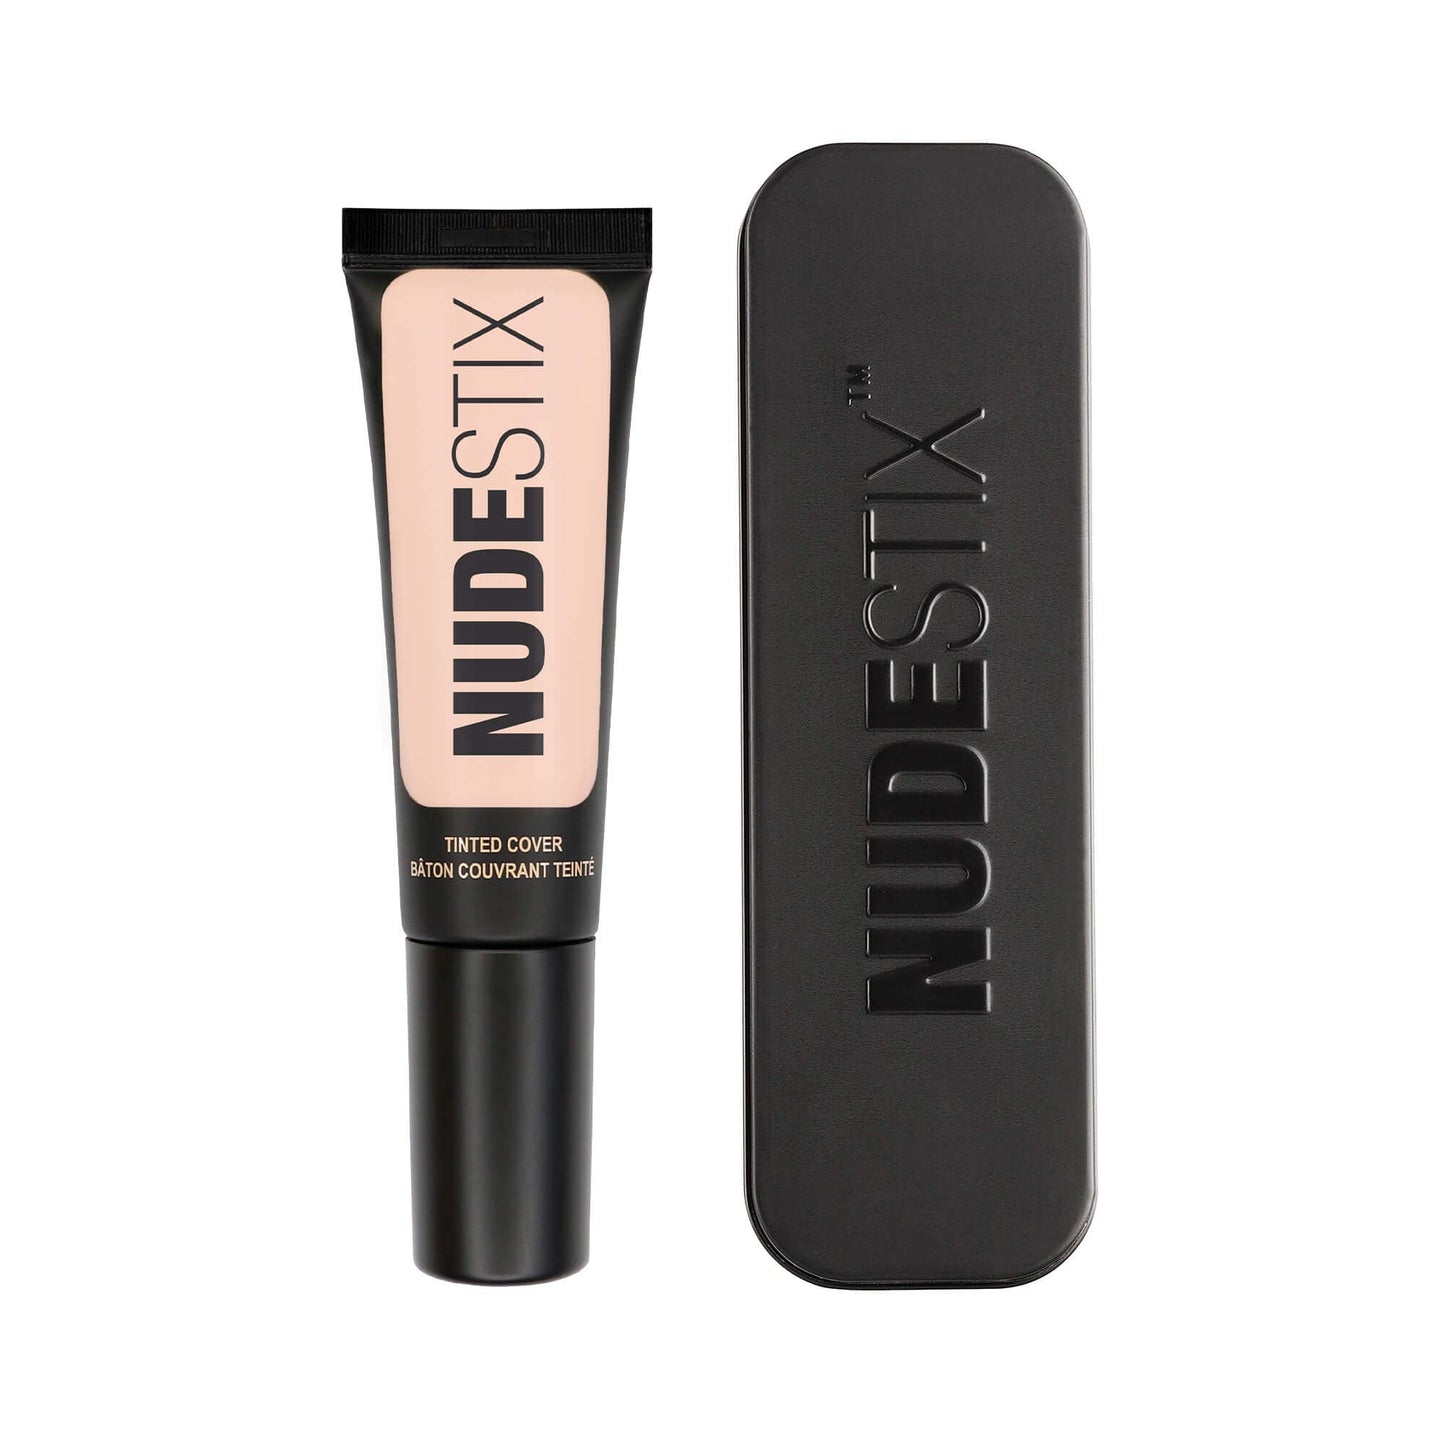 Tinted Cover Liquid Foundation in shade Nude 1 with Nudestix can